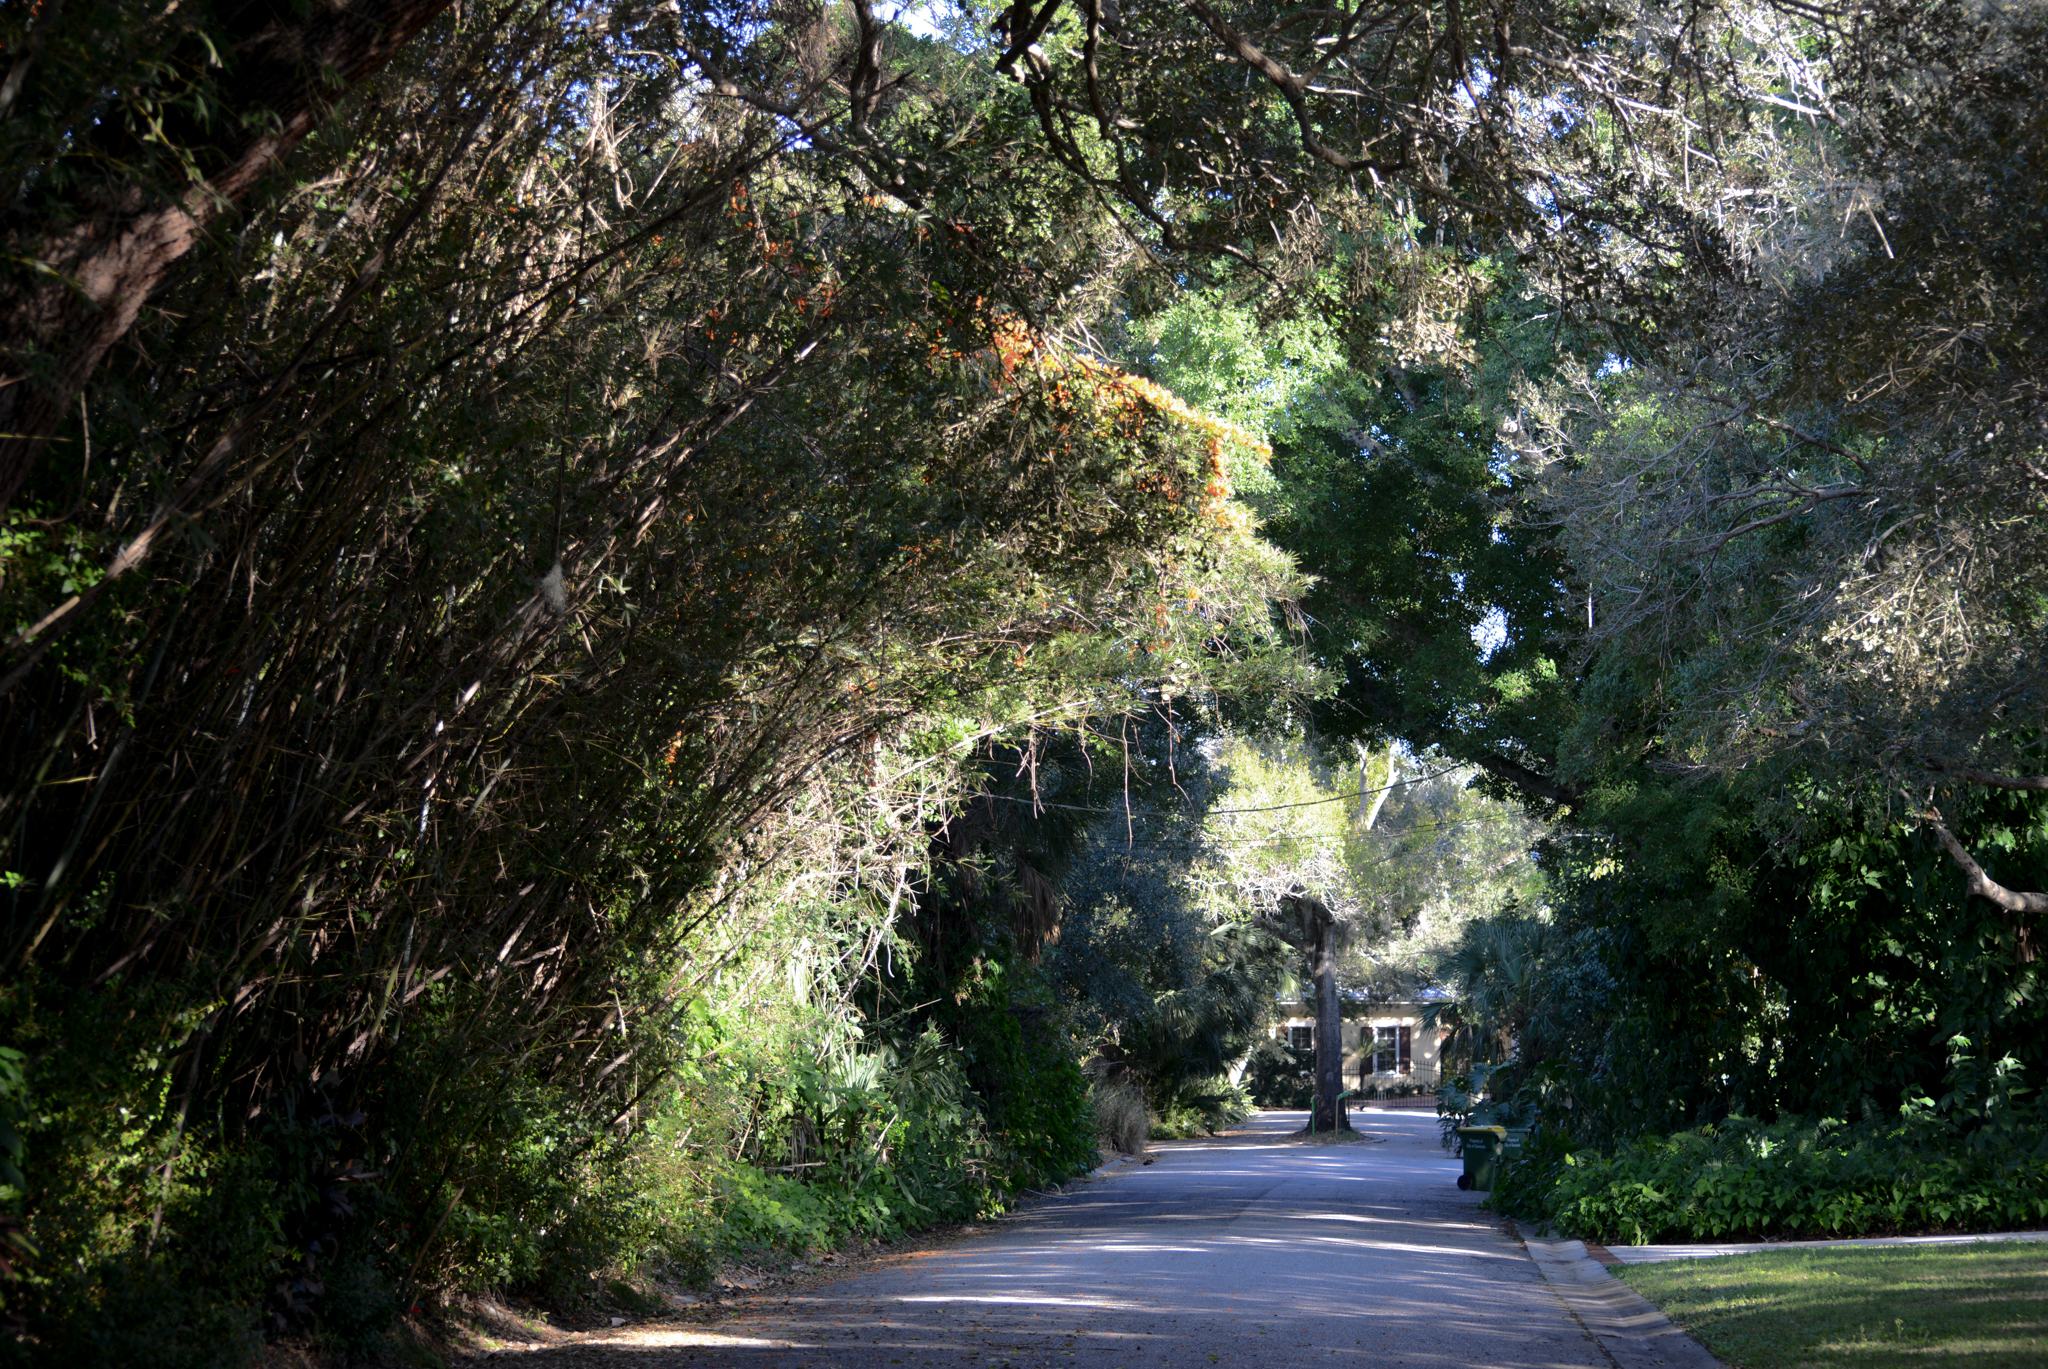 In this enchanting long entrance drive, the light dances among the handing moss.  An Arborist Paradise - Walking amongst 100 year old Trees in Florida